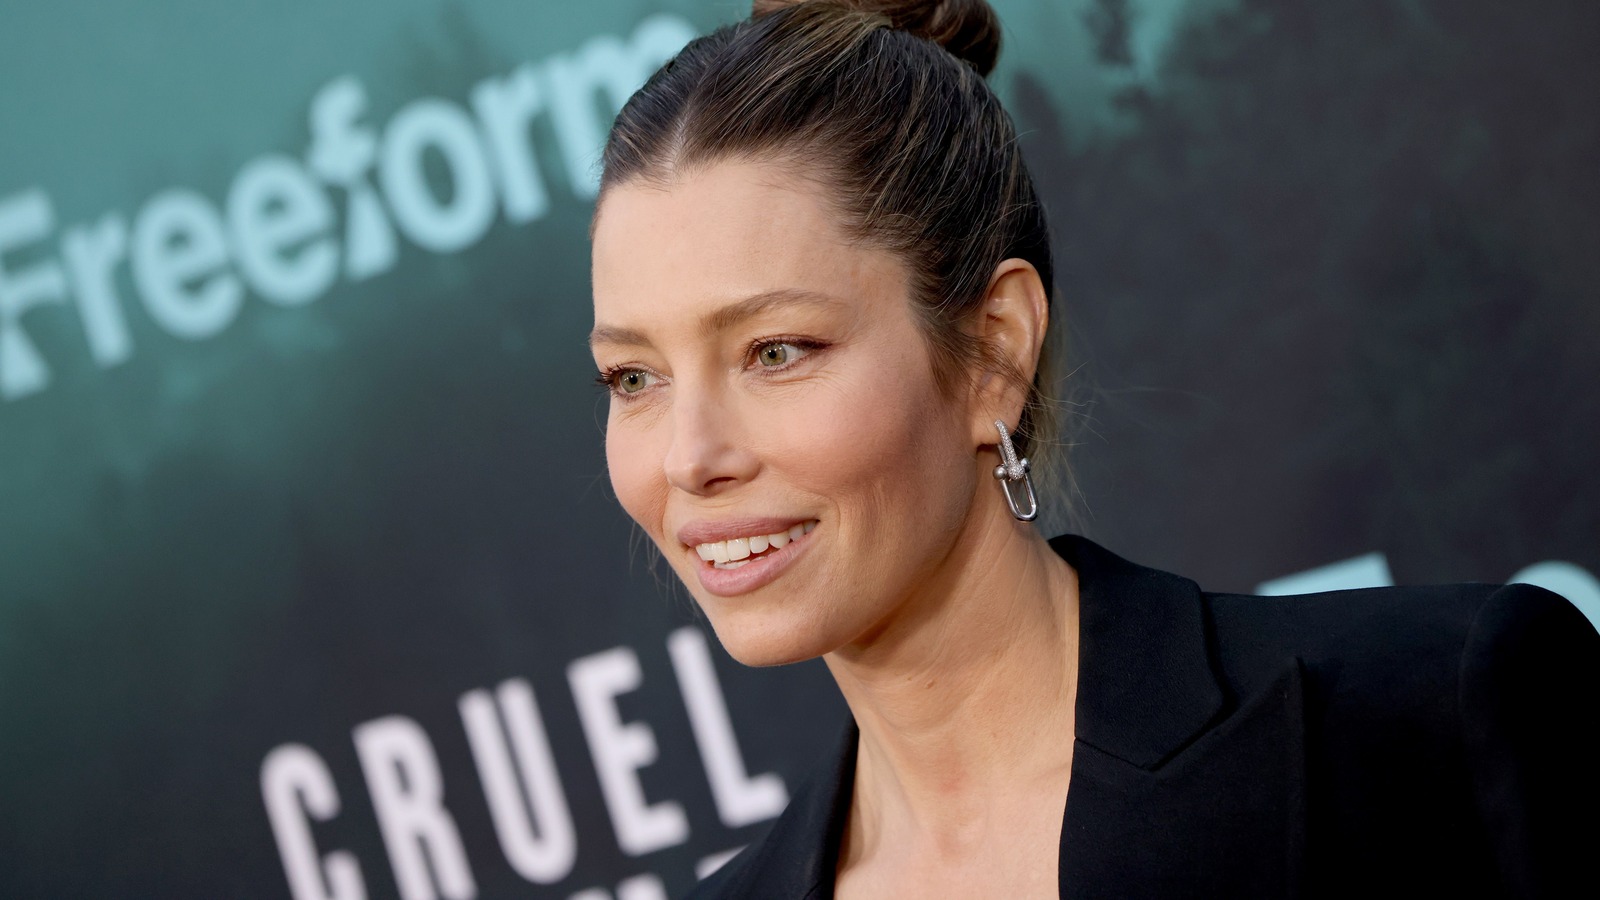 https://www.looper.com/img/gallery/why-you-rarely-hear-about-jessica-biel-anymore/l-intro-1697550745.jpg